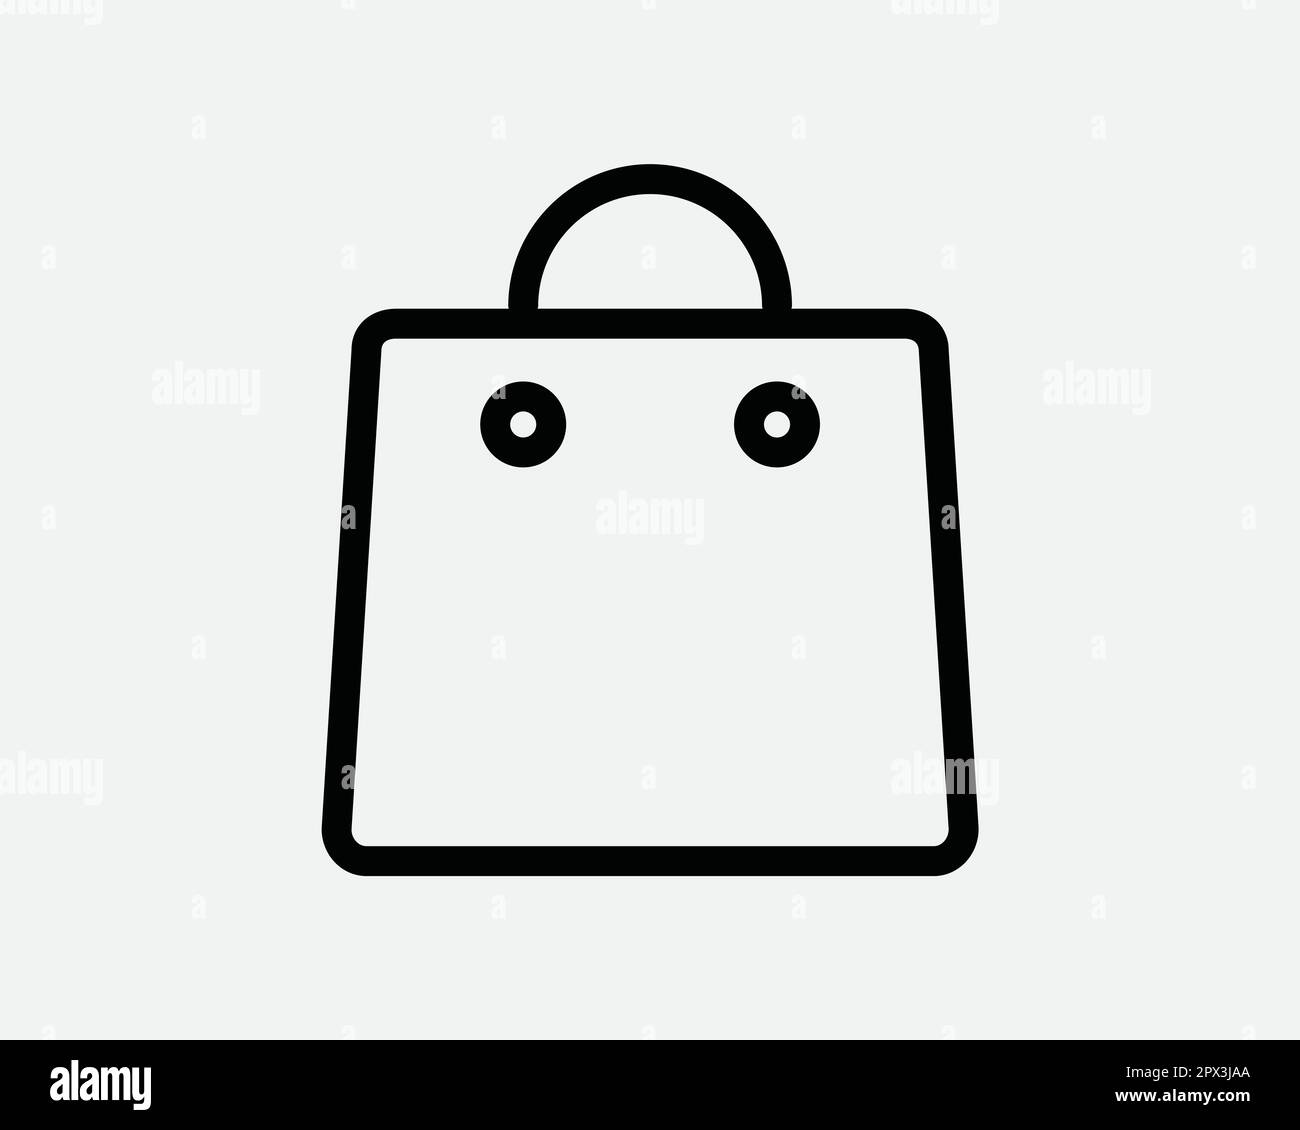 Shopping Bag, , Grocery Store, Fotosearch, Food, Paper Bag, Reusable Shopping  Bag, Tote Bag transparent background PNG clipart